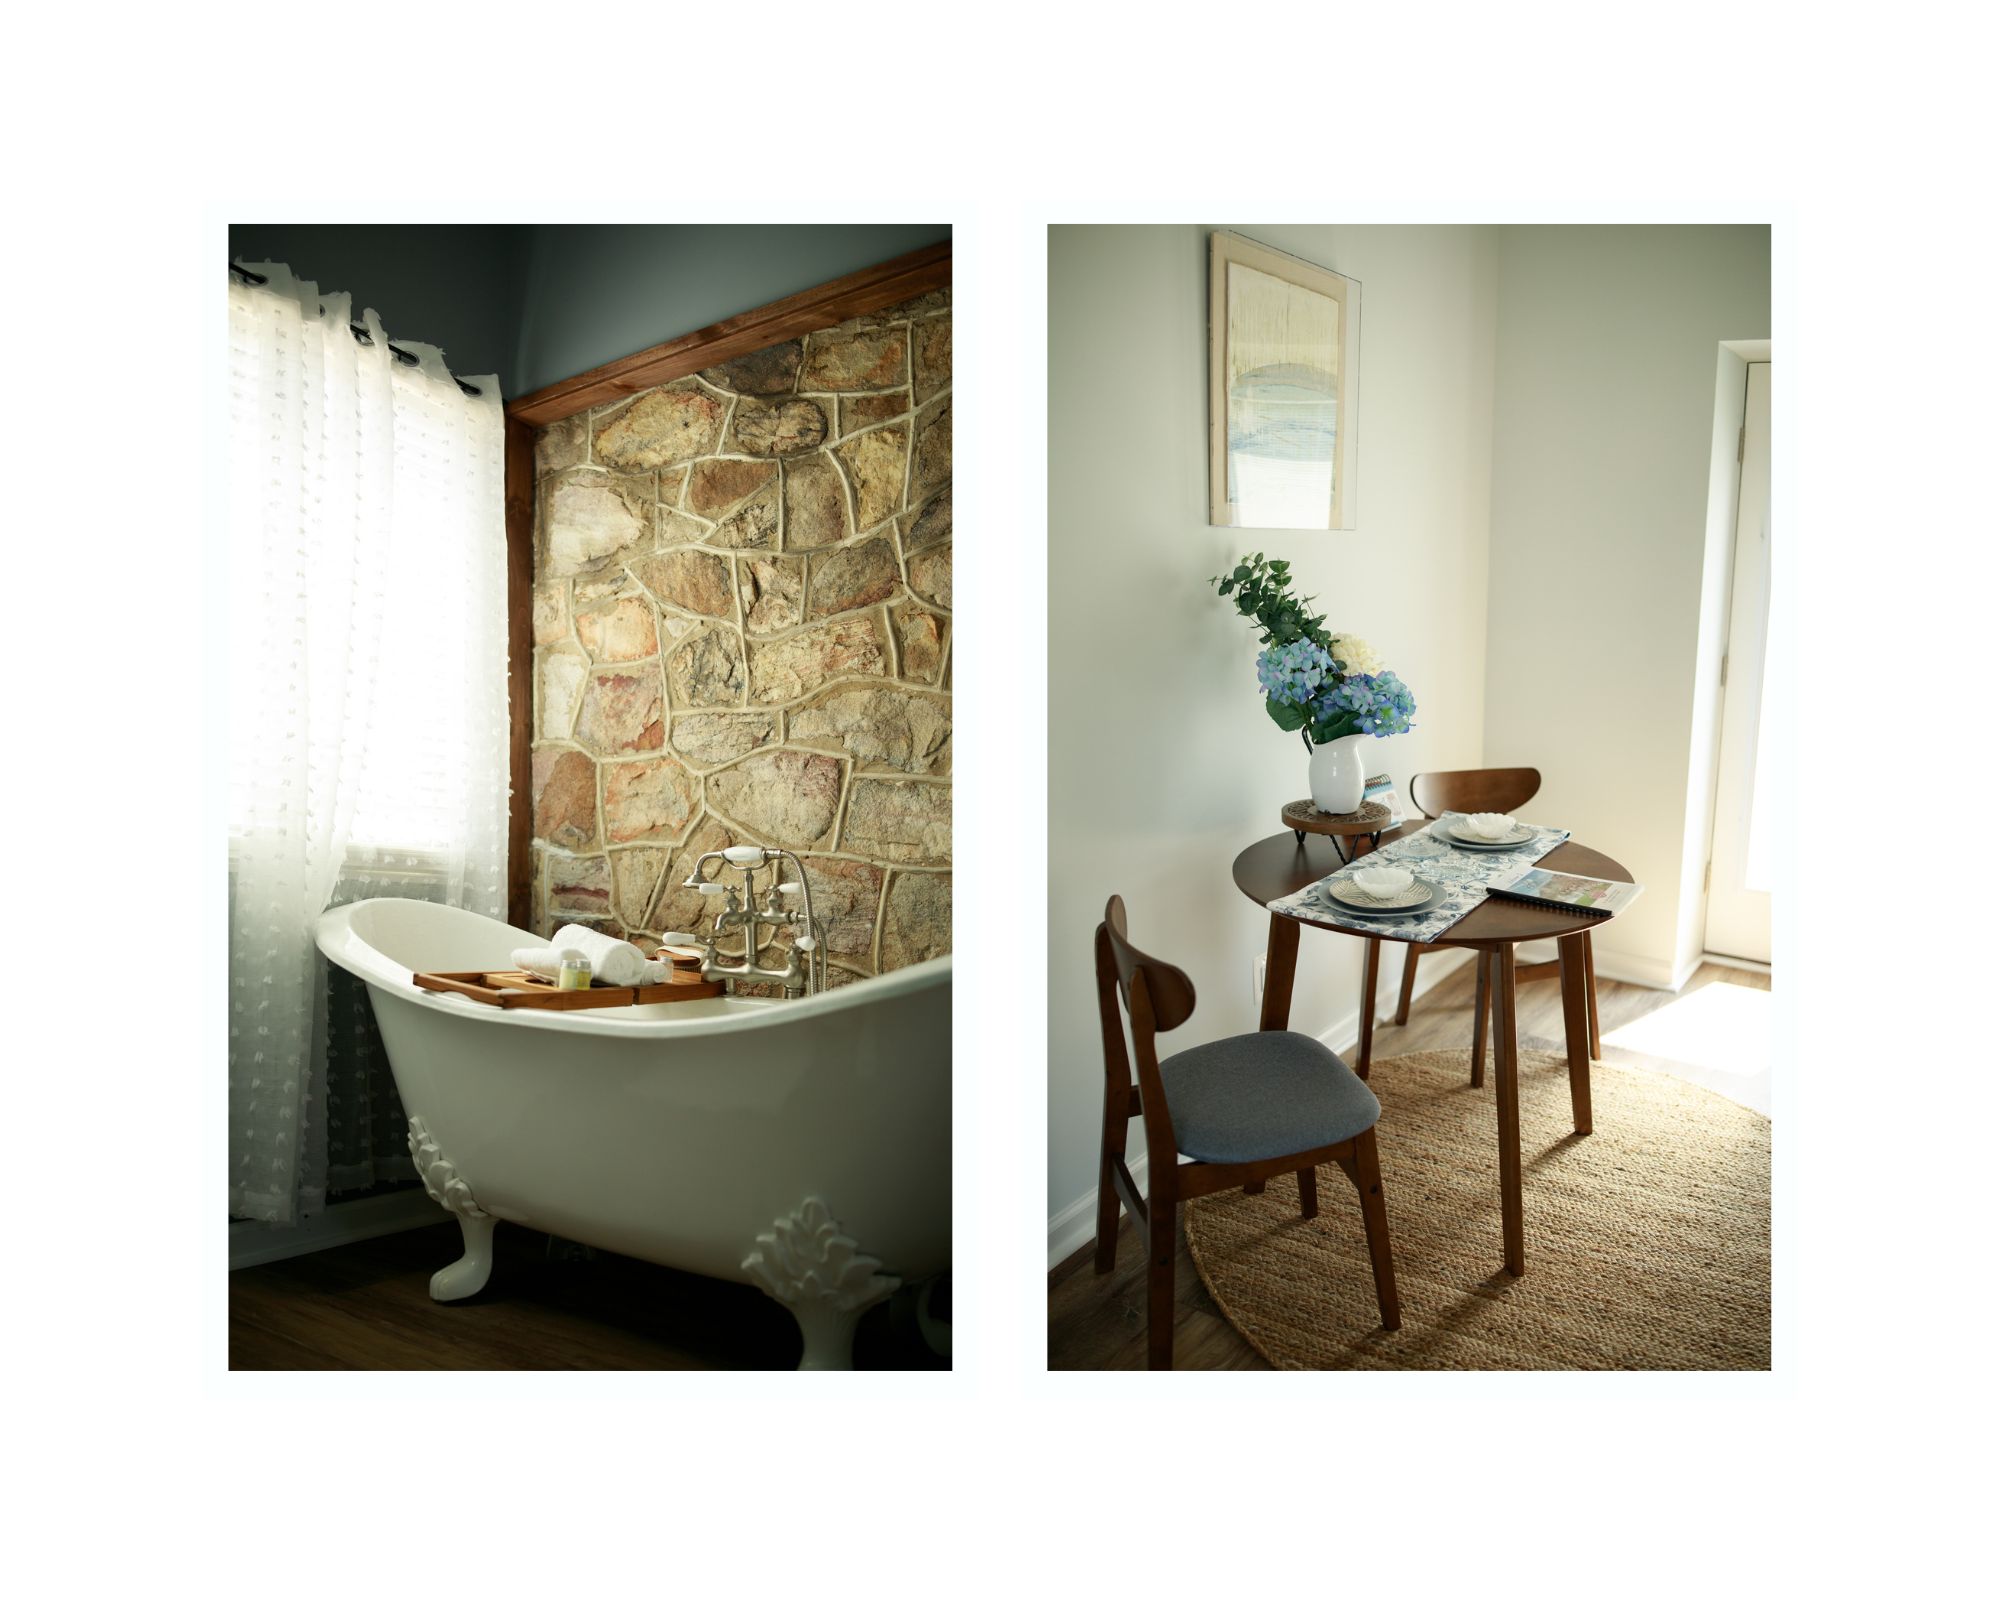 Clawfoot tub and kitchen table detail photos.